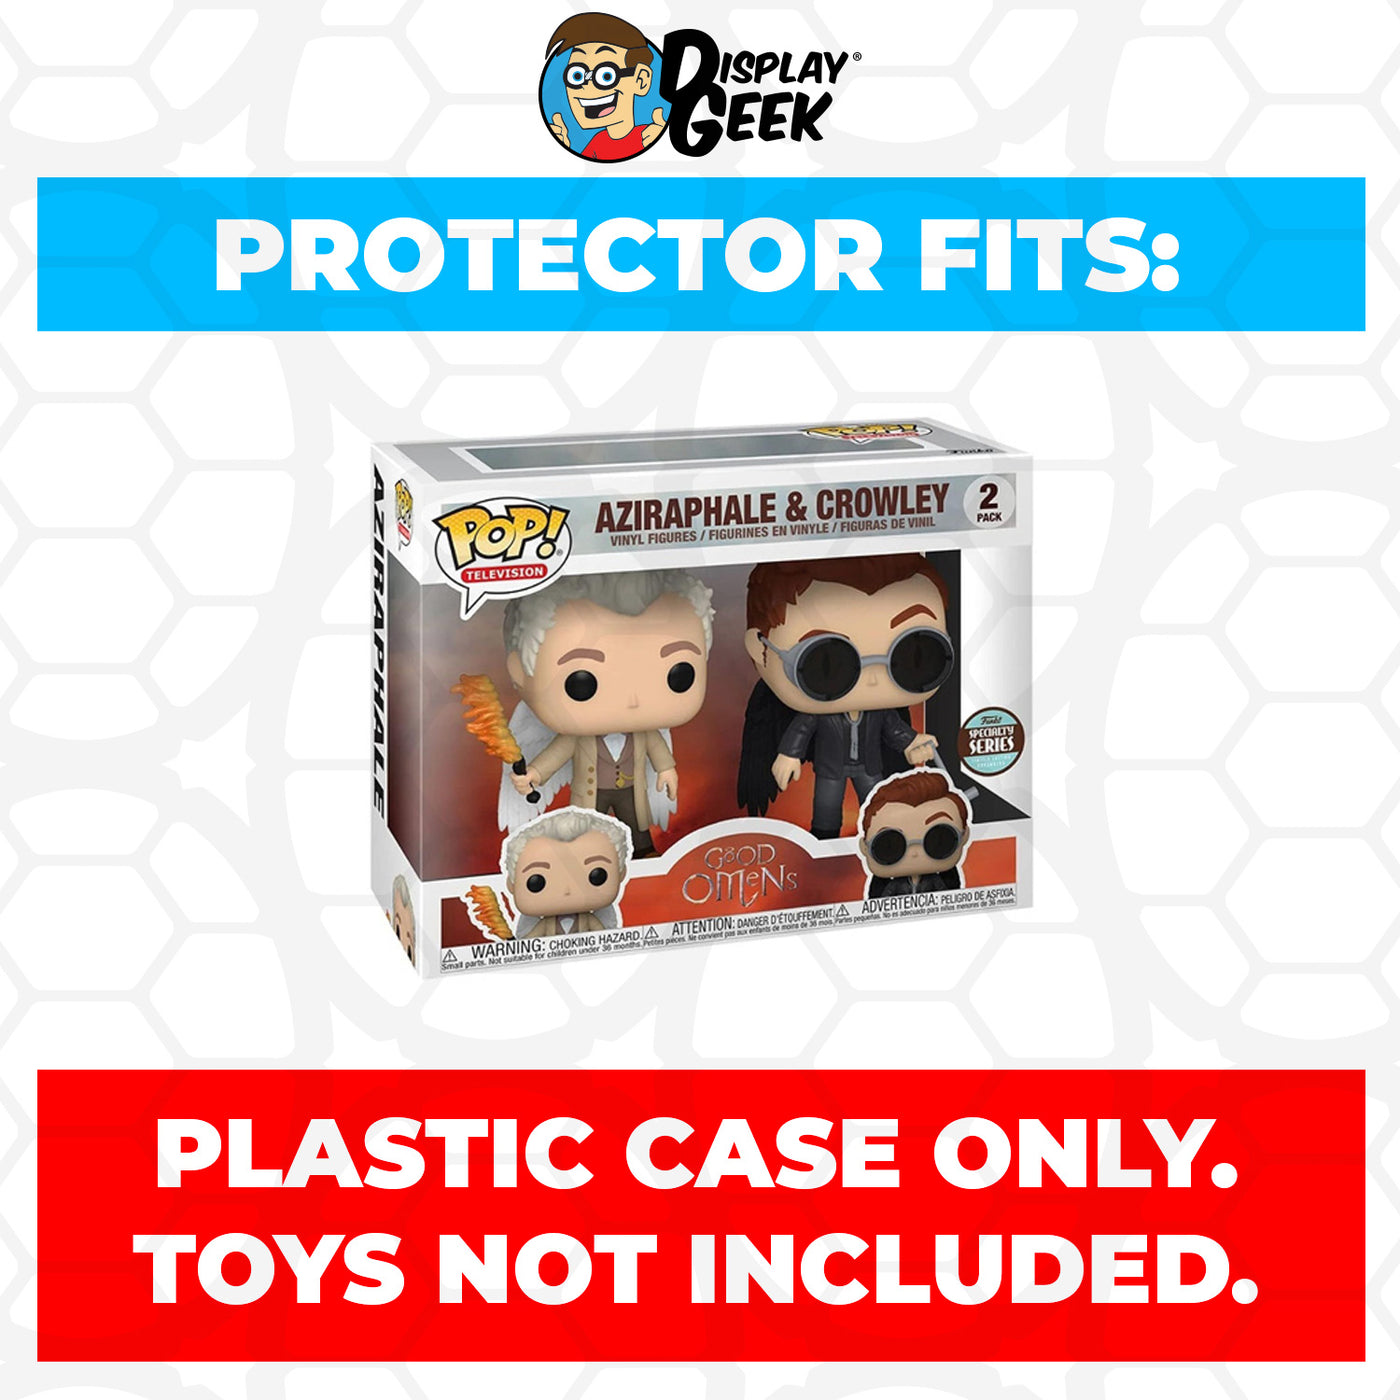 Pop Protector for 2 Pack Aziraphale & Crowley Funko Pop on The Protector Guide App by Display Geek